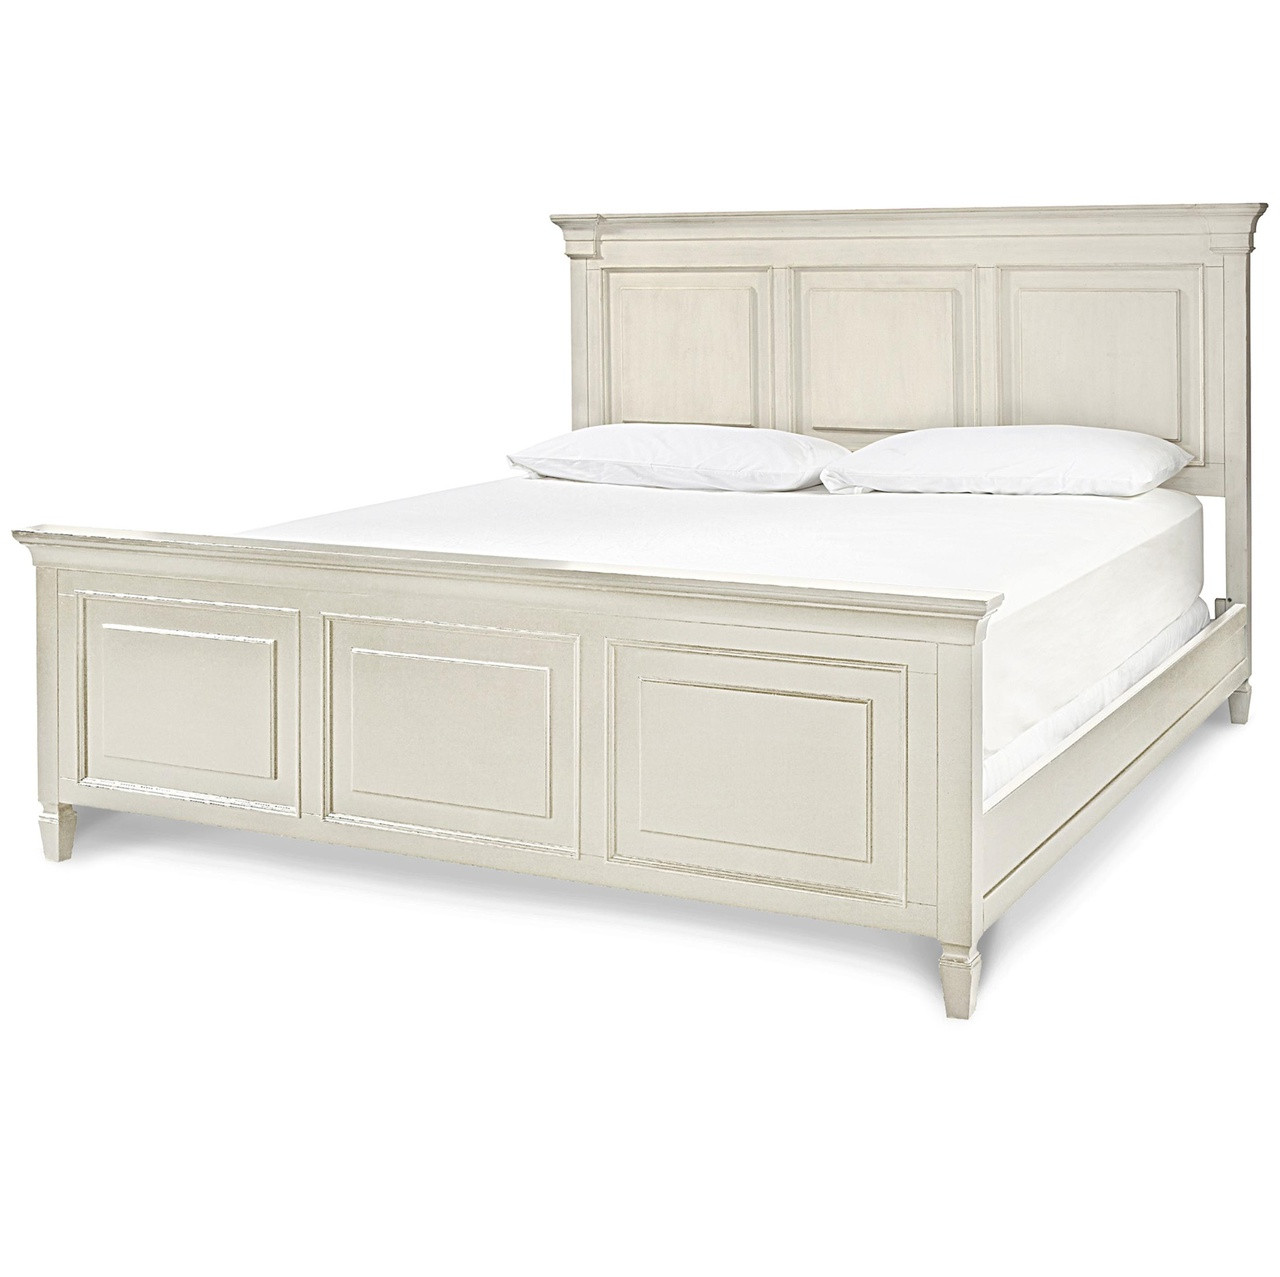 CountryChic White King Panel Bed Frame Zin Home